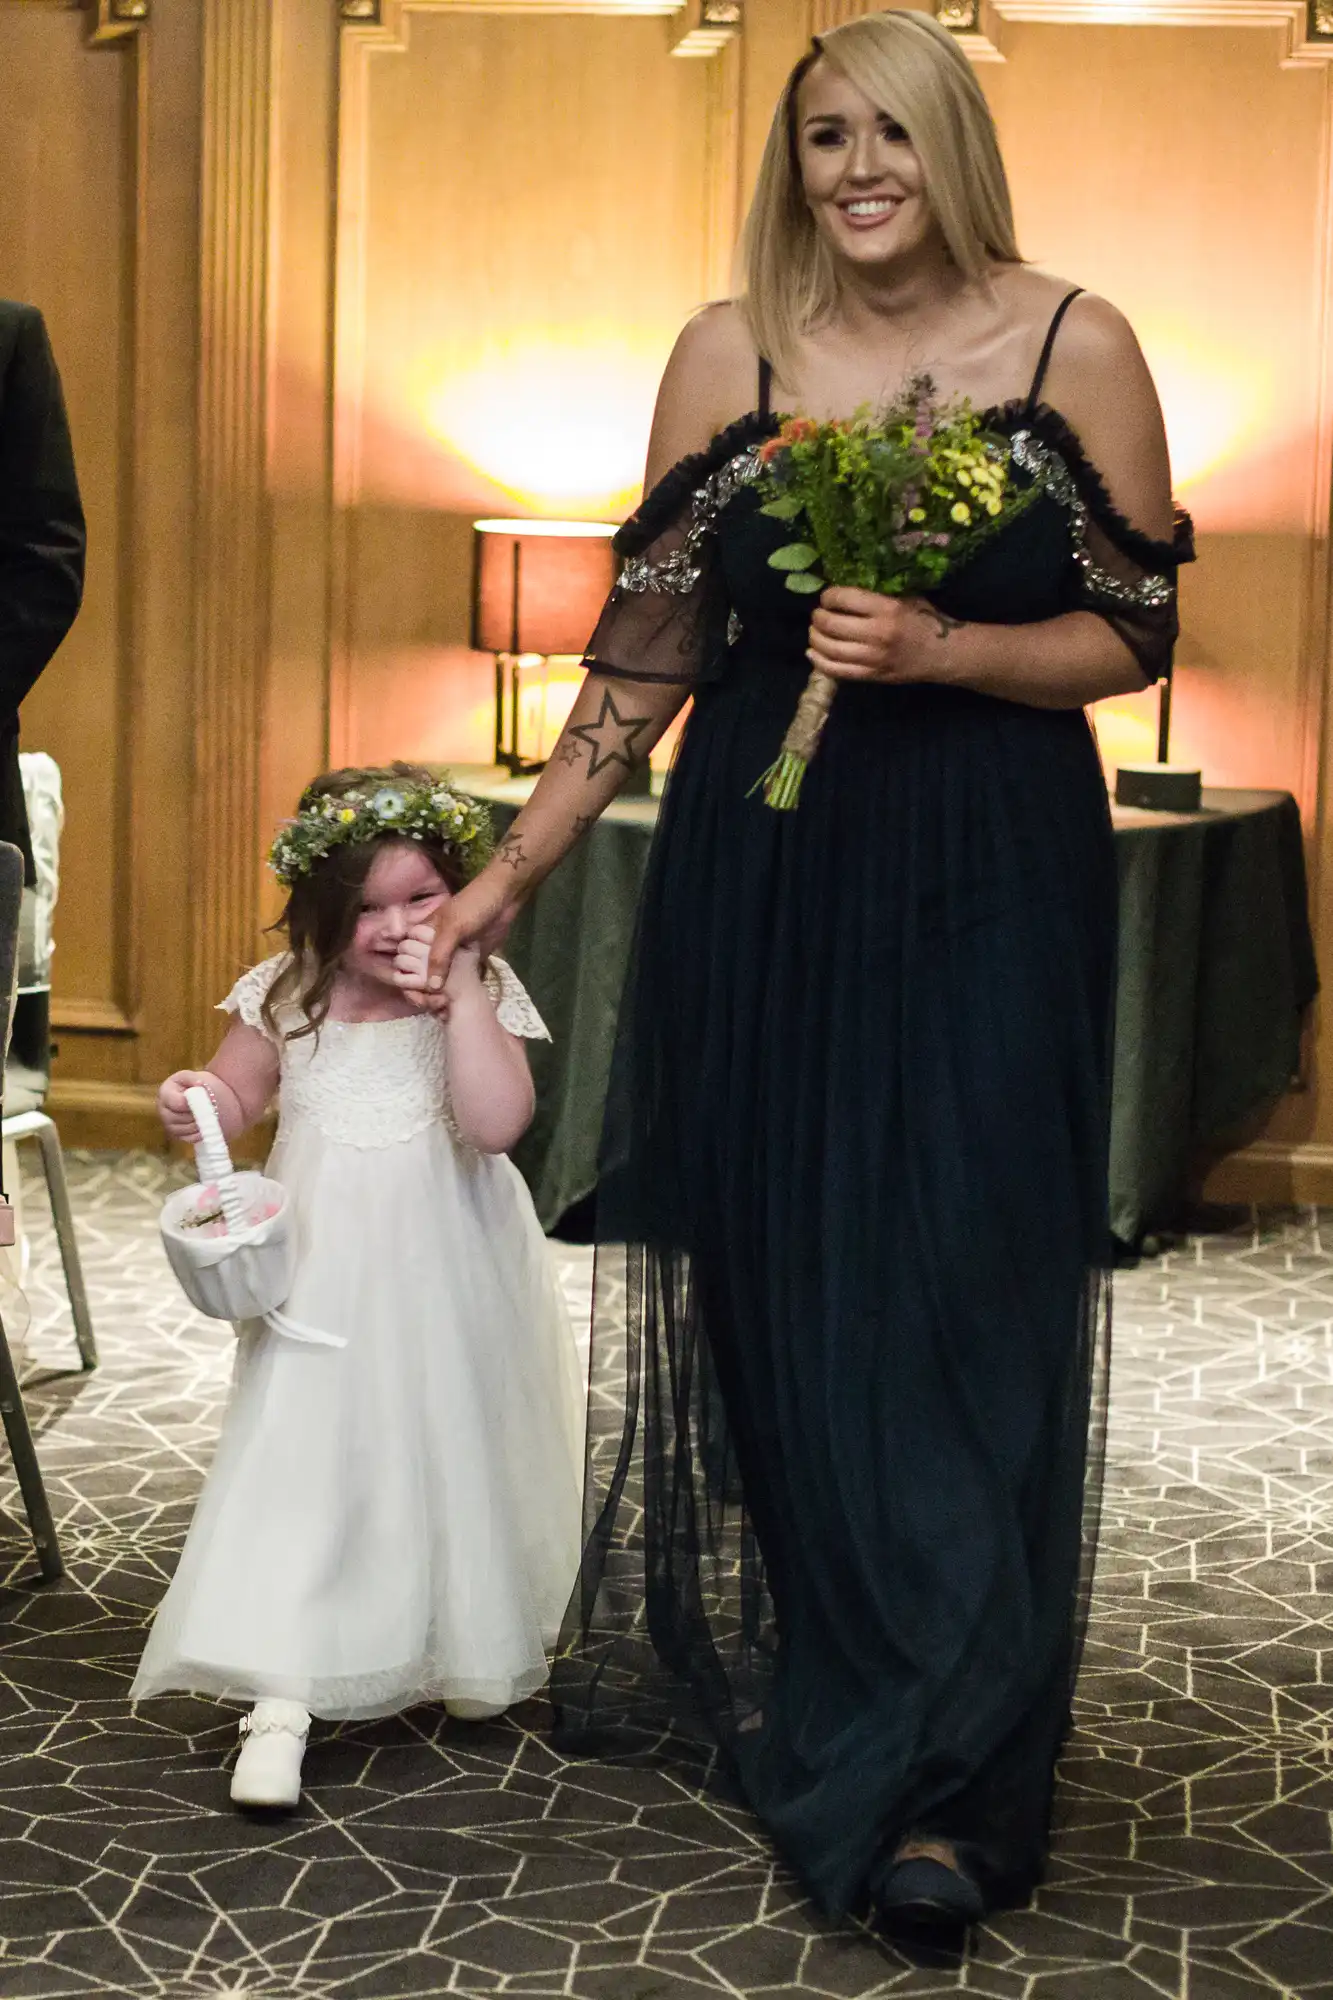 A woman in a navy dress holds a bouquet and the hand of a small girl in a white dress wearing a floral headband, both smiling as they walk.